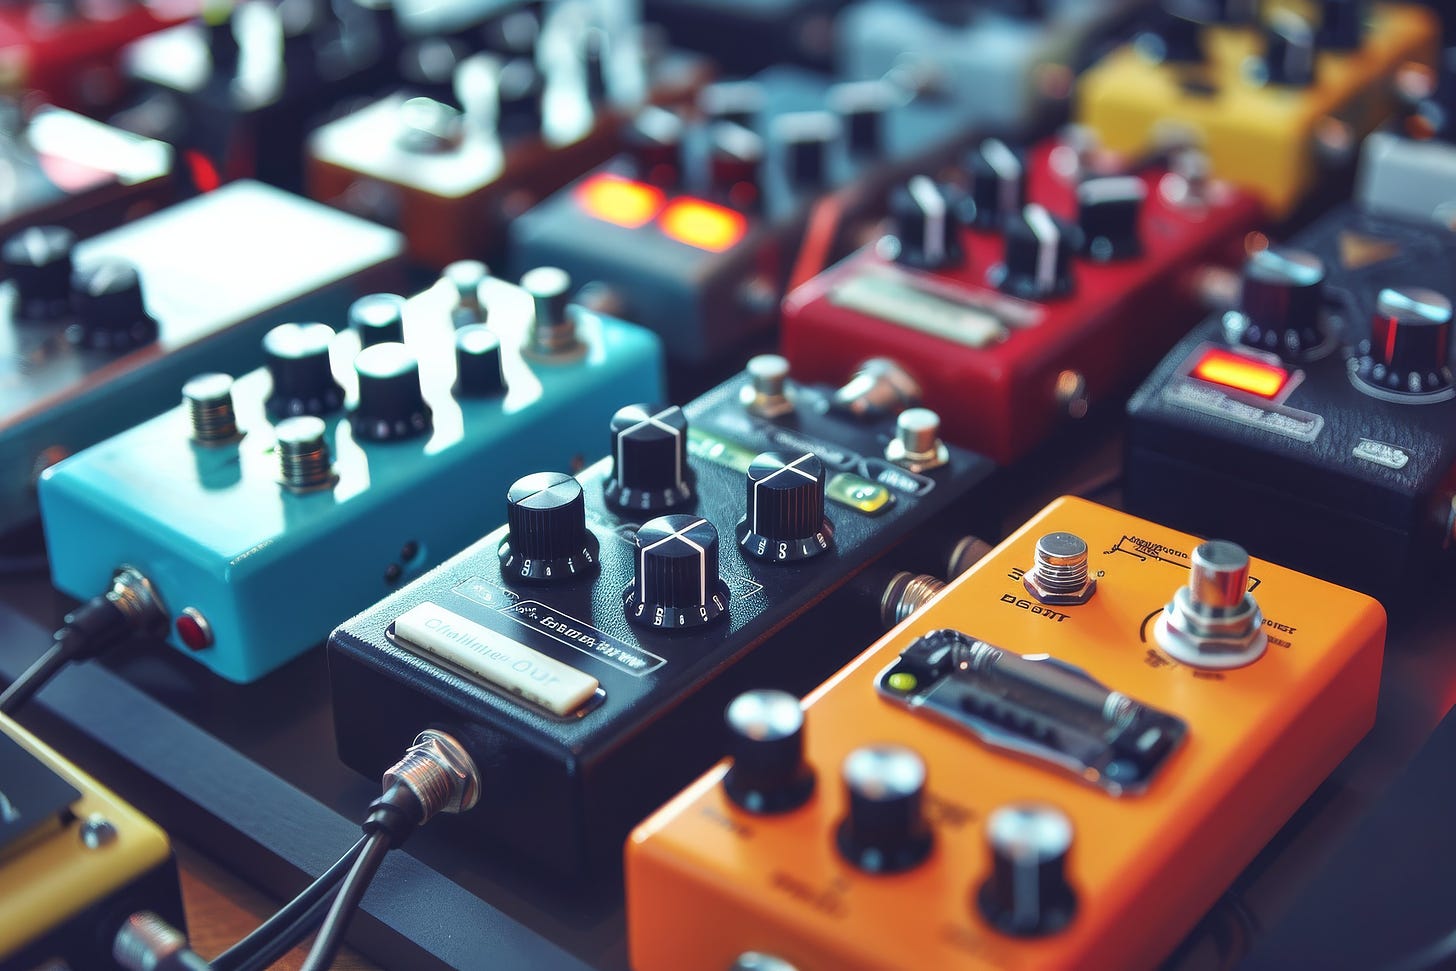 AI generated image of guitar pedals. So there are some inaccuracies in how they look.